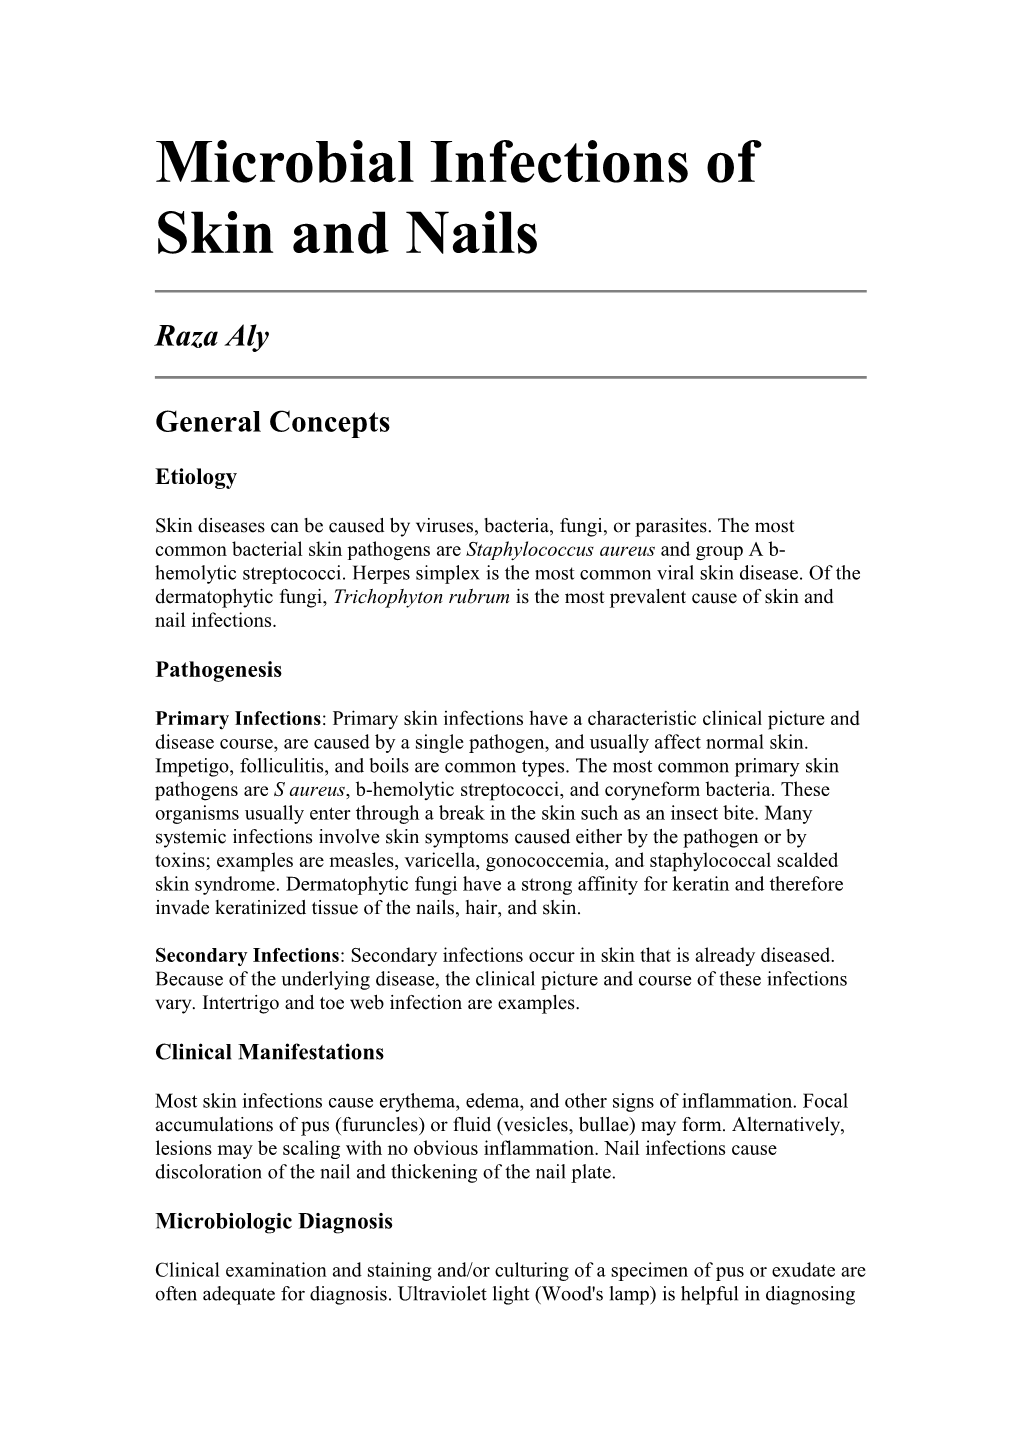 Microbial Infections of Skin and Nails